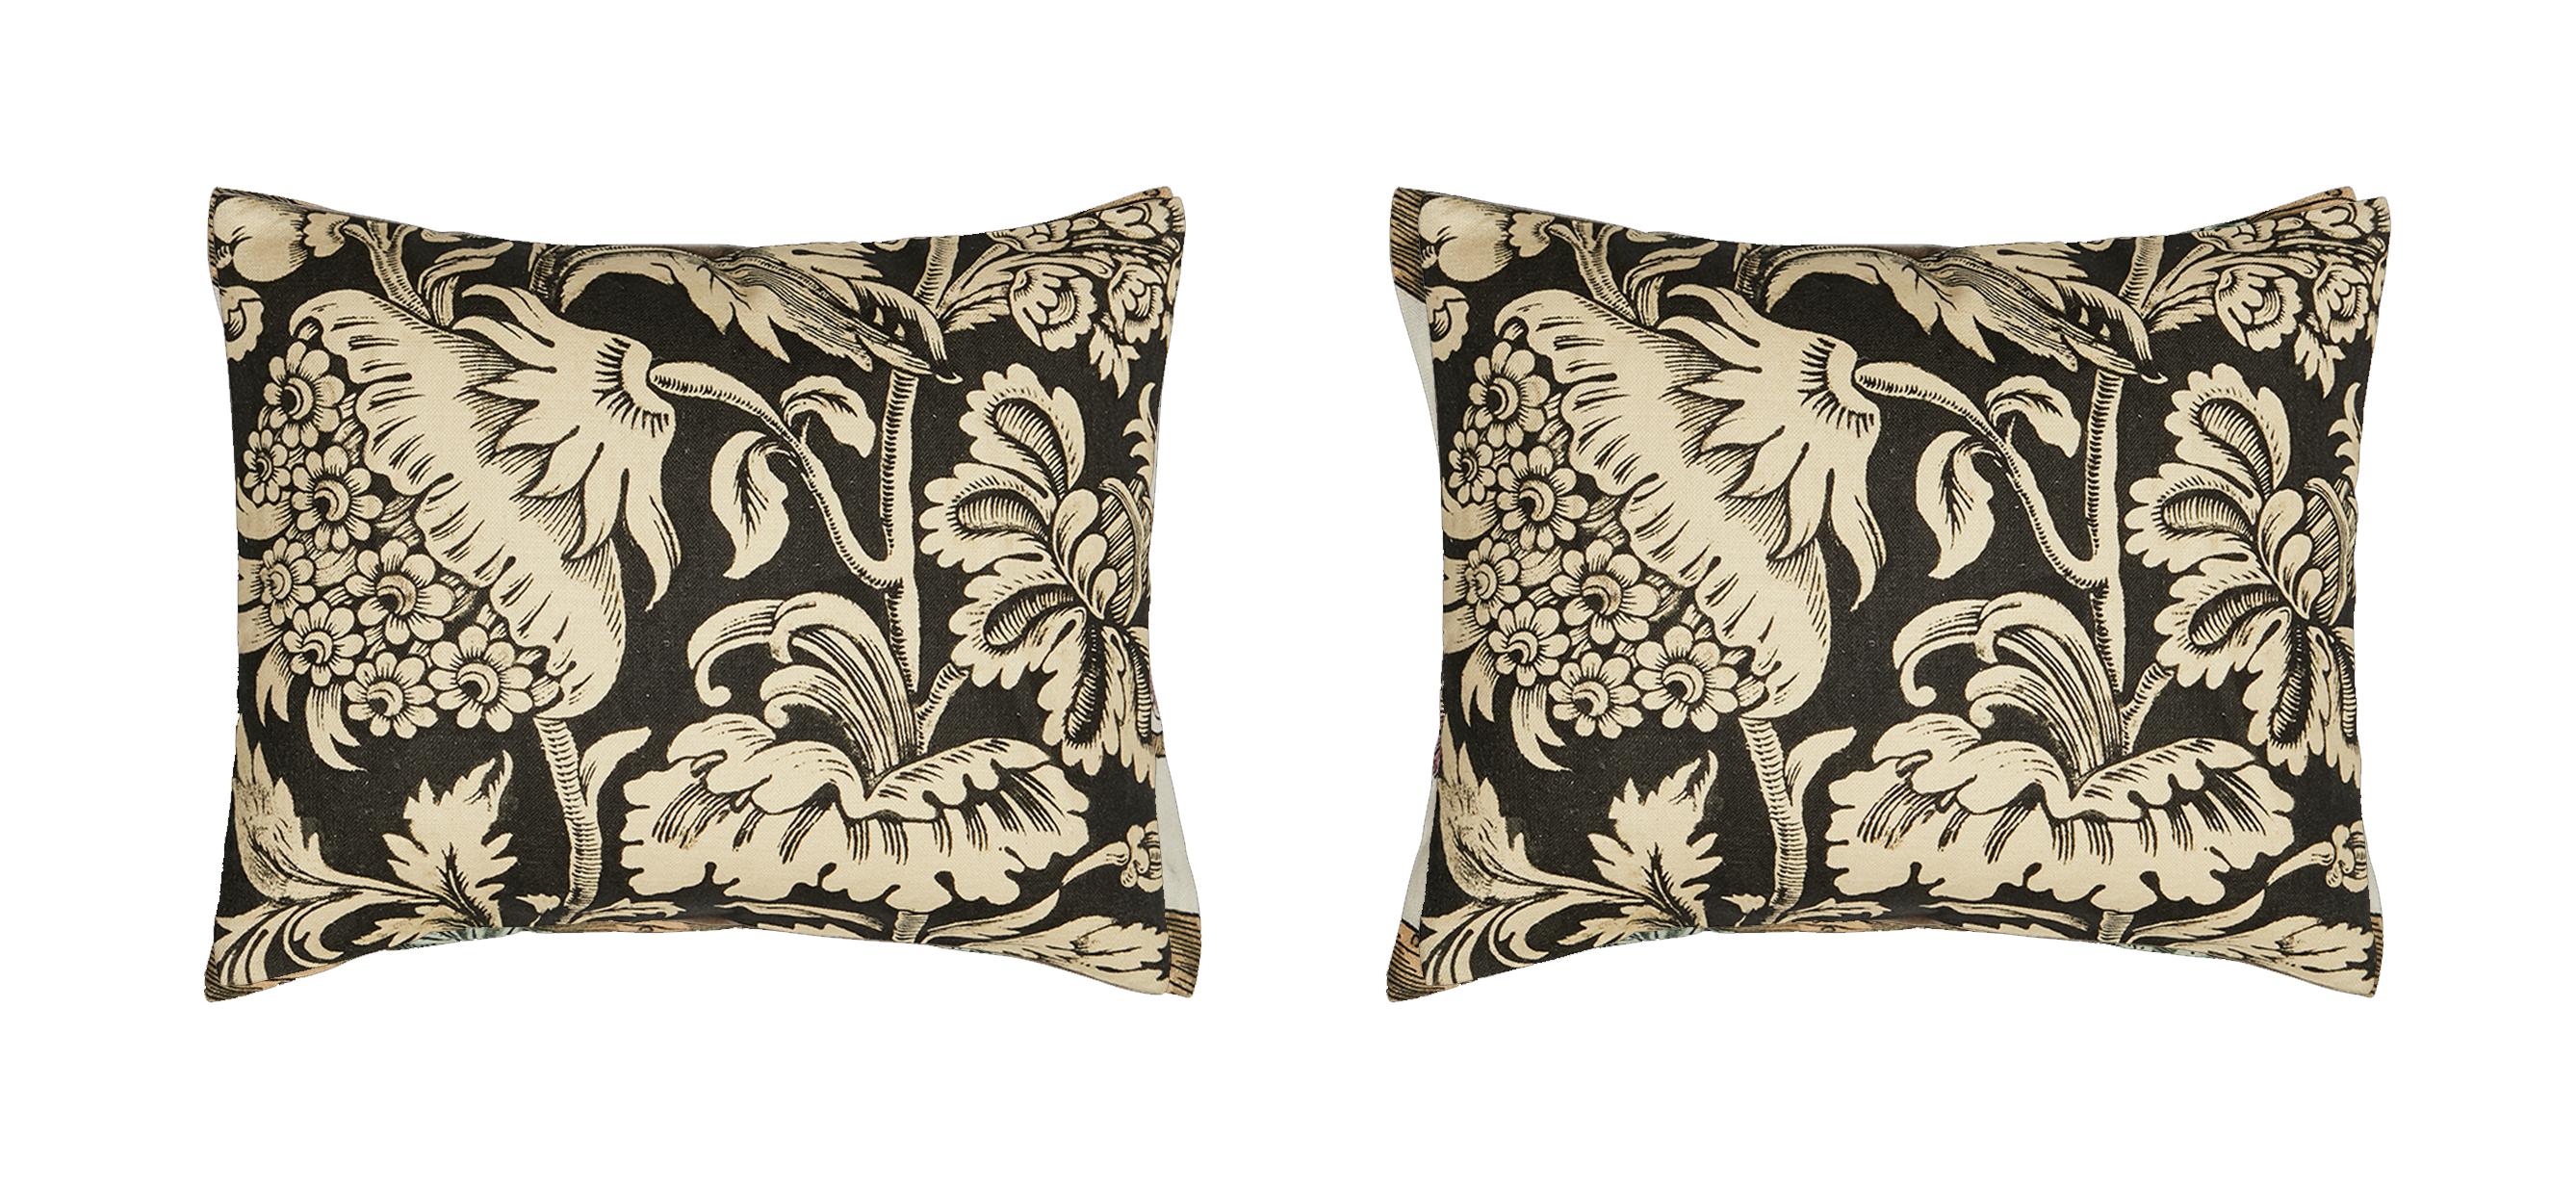 Anglo-Indian Pair of 12 x 16 Linen Pillows - Black White Grand Pavots pattern - Made in Paris For Sale